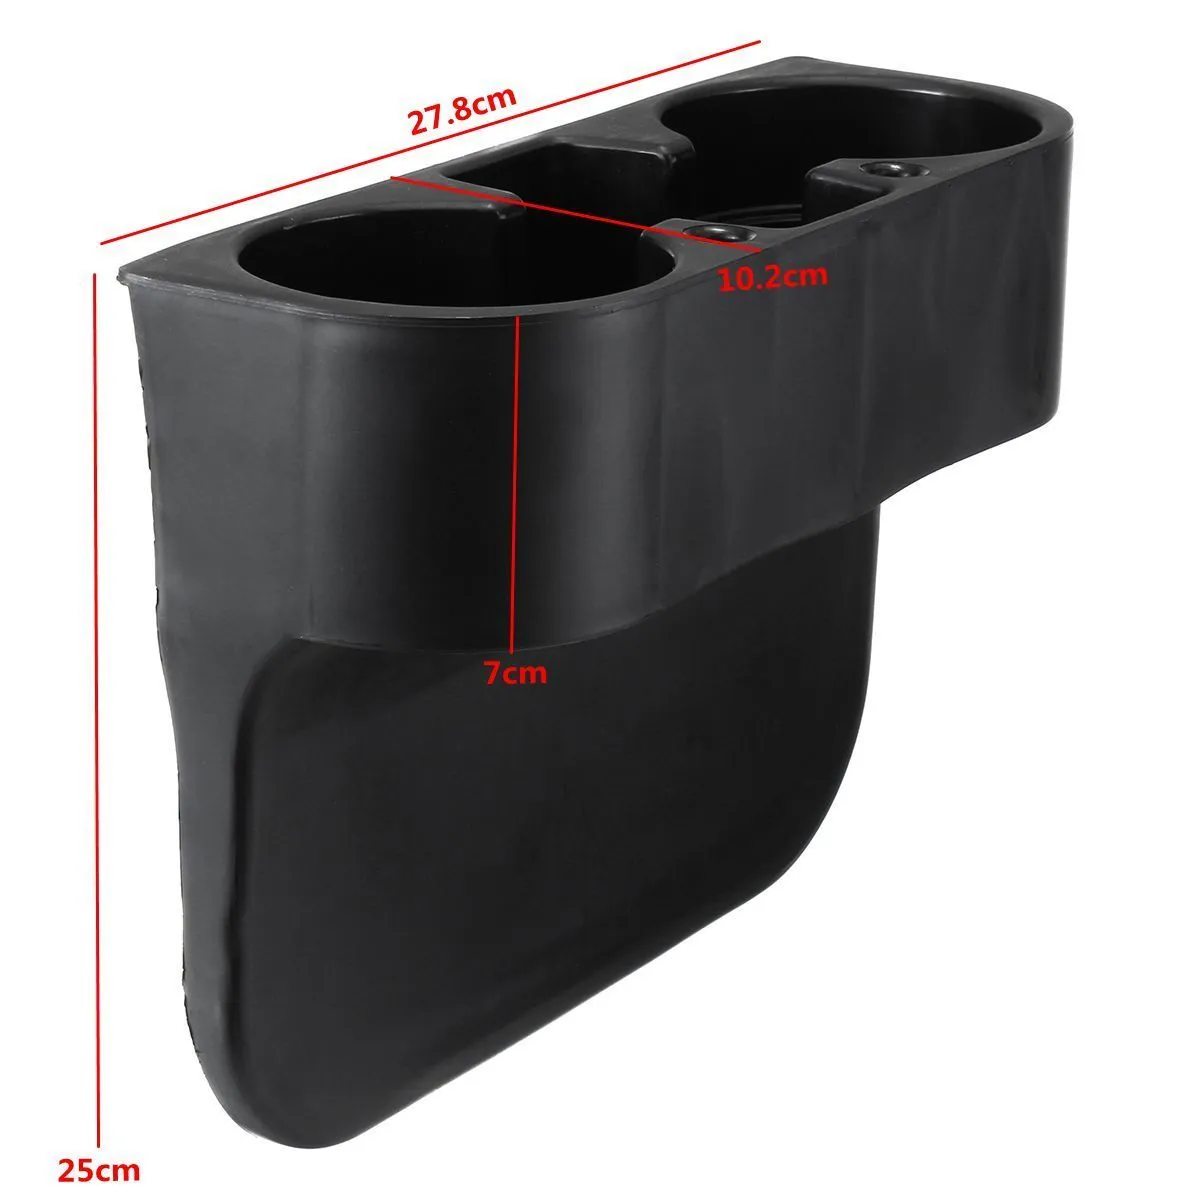 For Bmw E30 E36 E39 E46 E60 E90 Z4 I3 Z3 Z4 1 3 Series Car Black Front Drinks Cup Holder Car Front Center Console Cup Rack237I